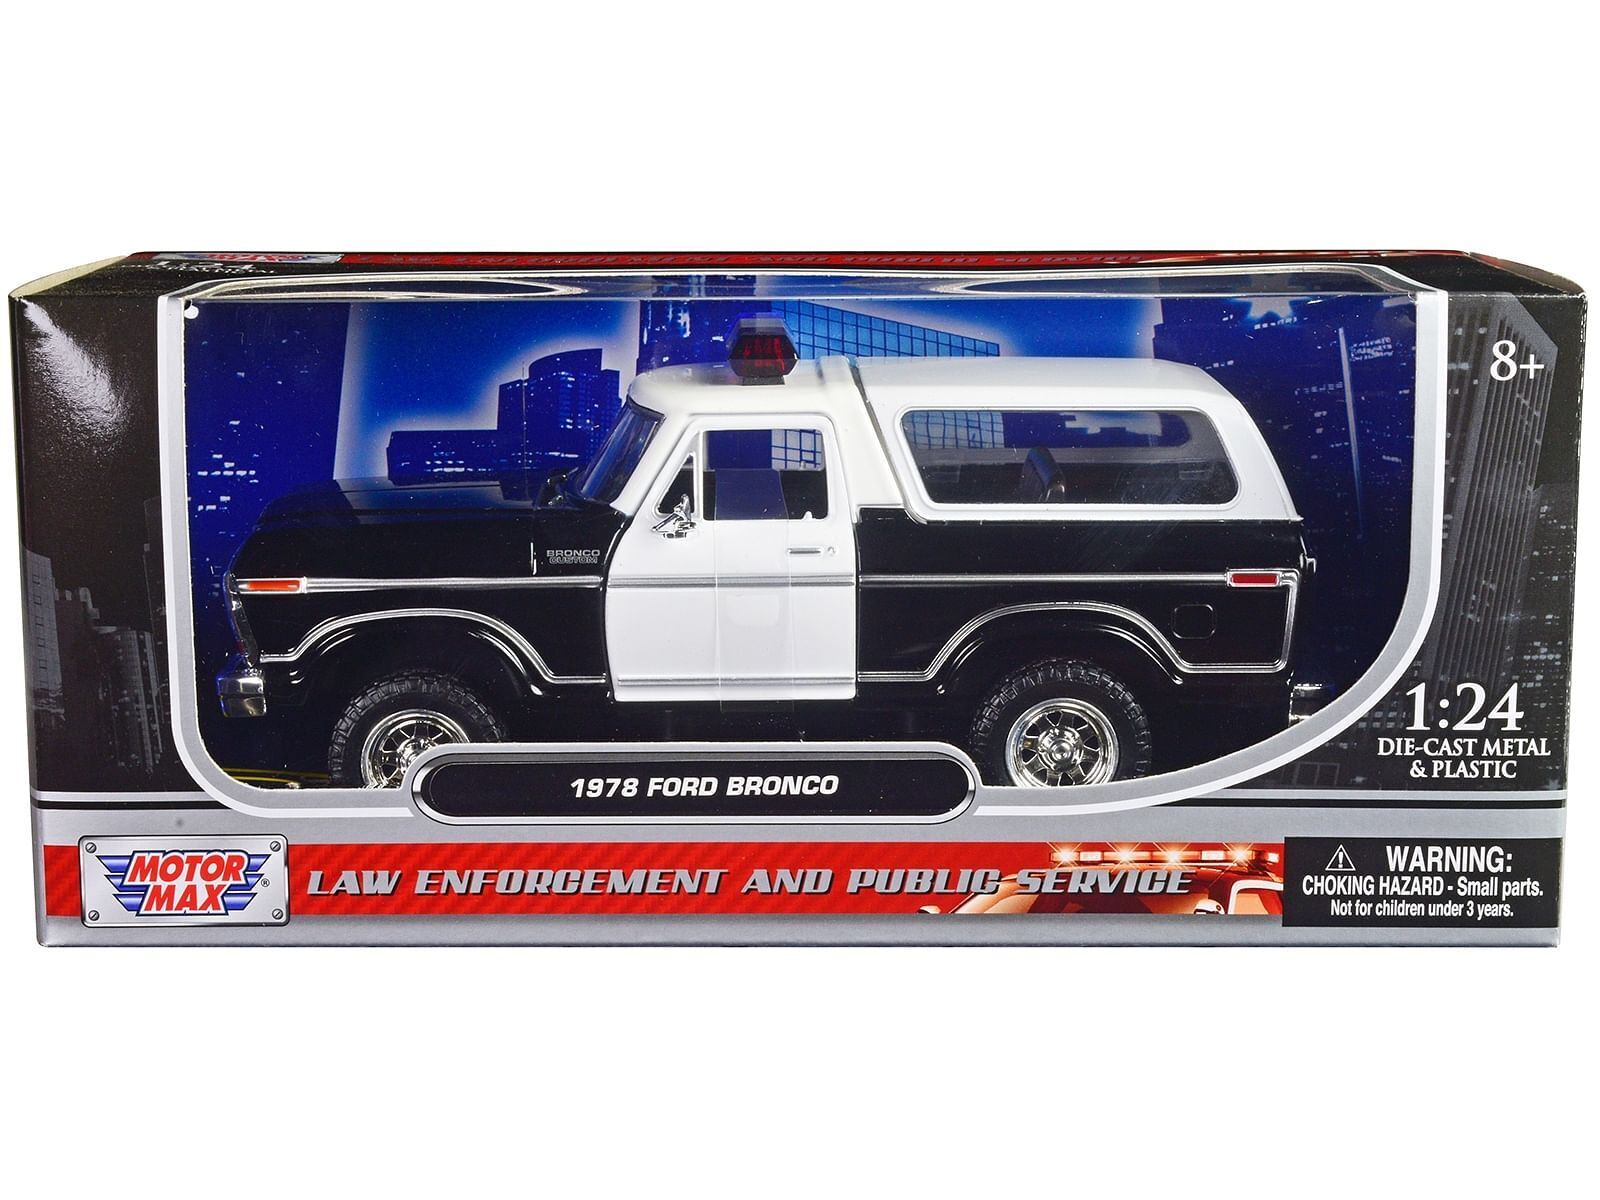 1978 Ford Bronco Police Car Unmarked Black and White 